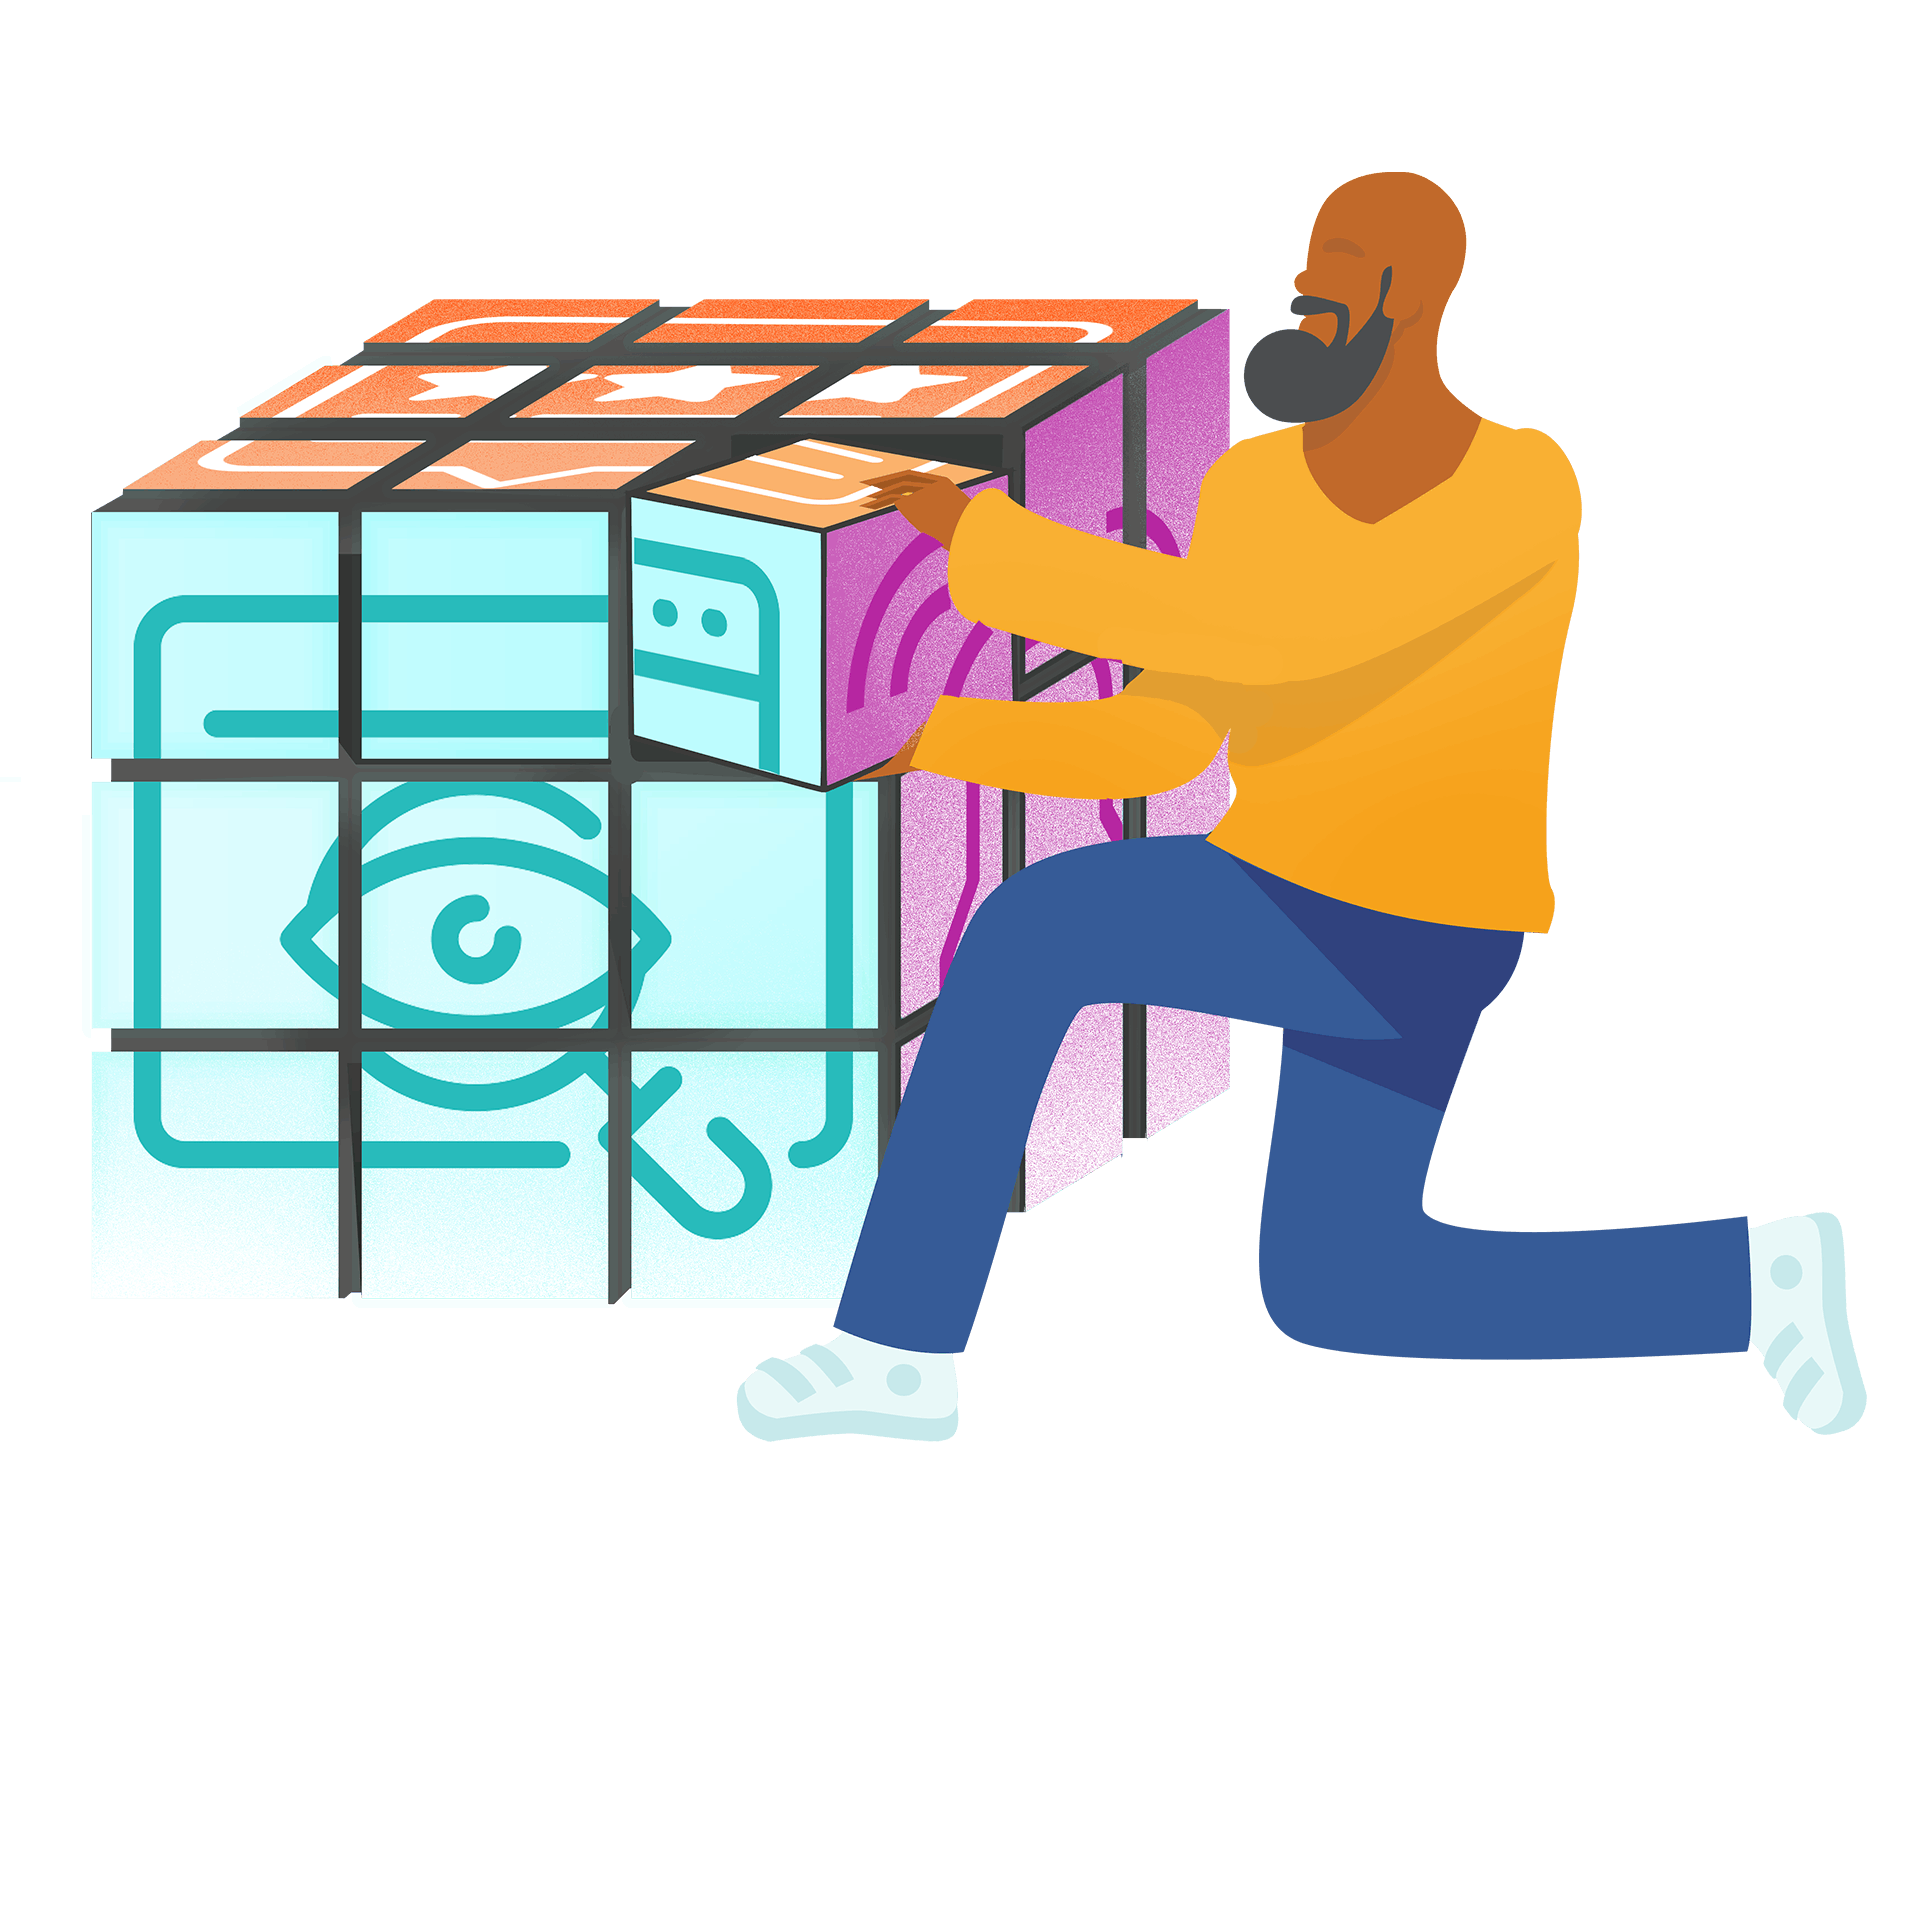 An illustration of a man putting missing piece into a rubik's cube like puzzle